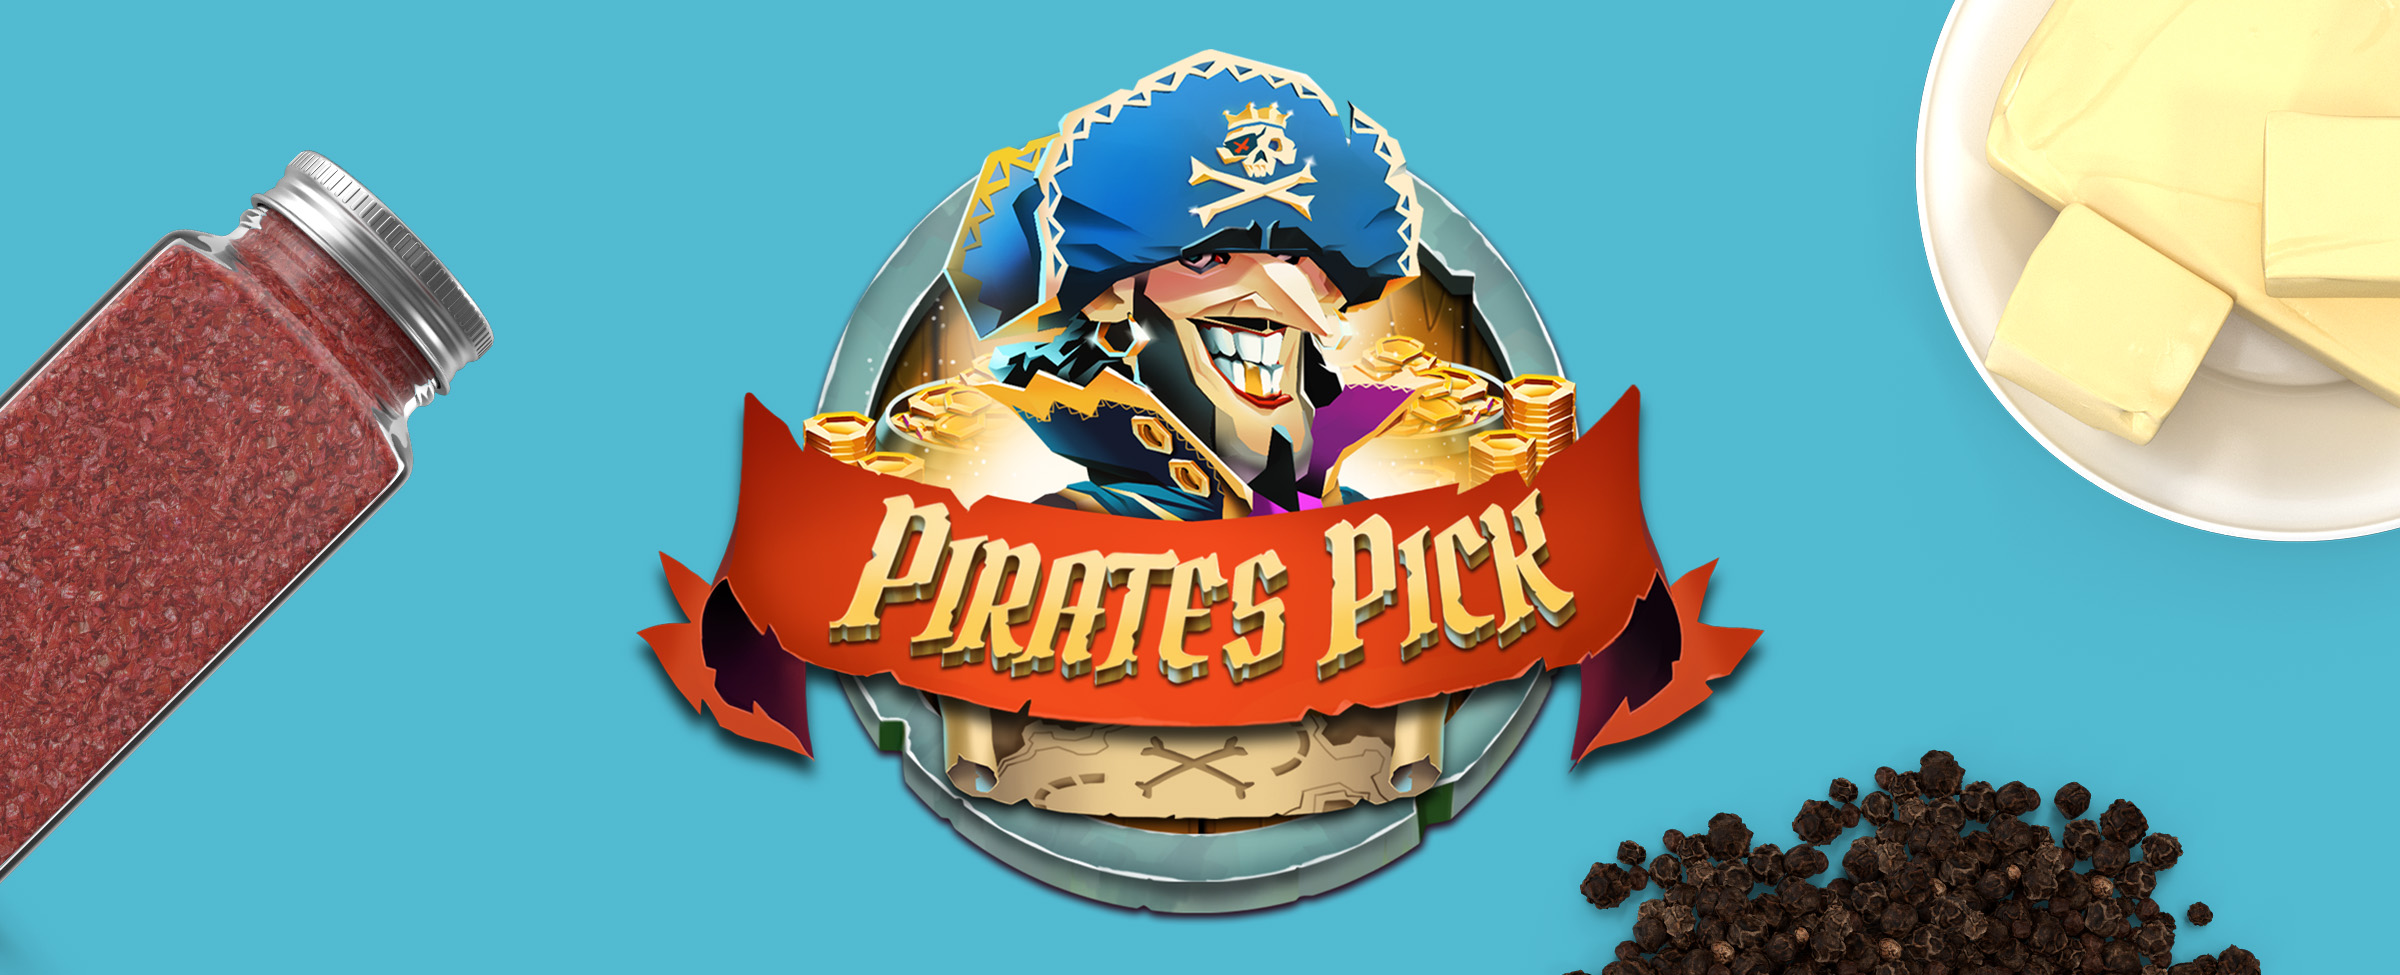 The Cafe Casino slot game Pirates Pick is shown in the center of a blue table surface, flanked by dried cloves, a small bowl of butter, and a spice bottle with red spice.